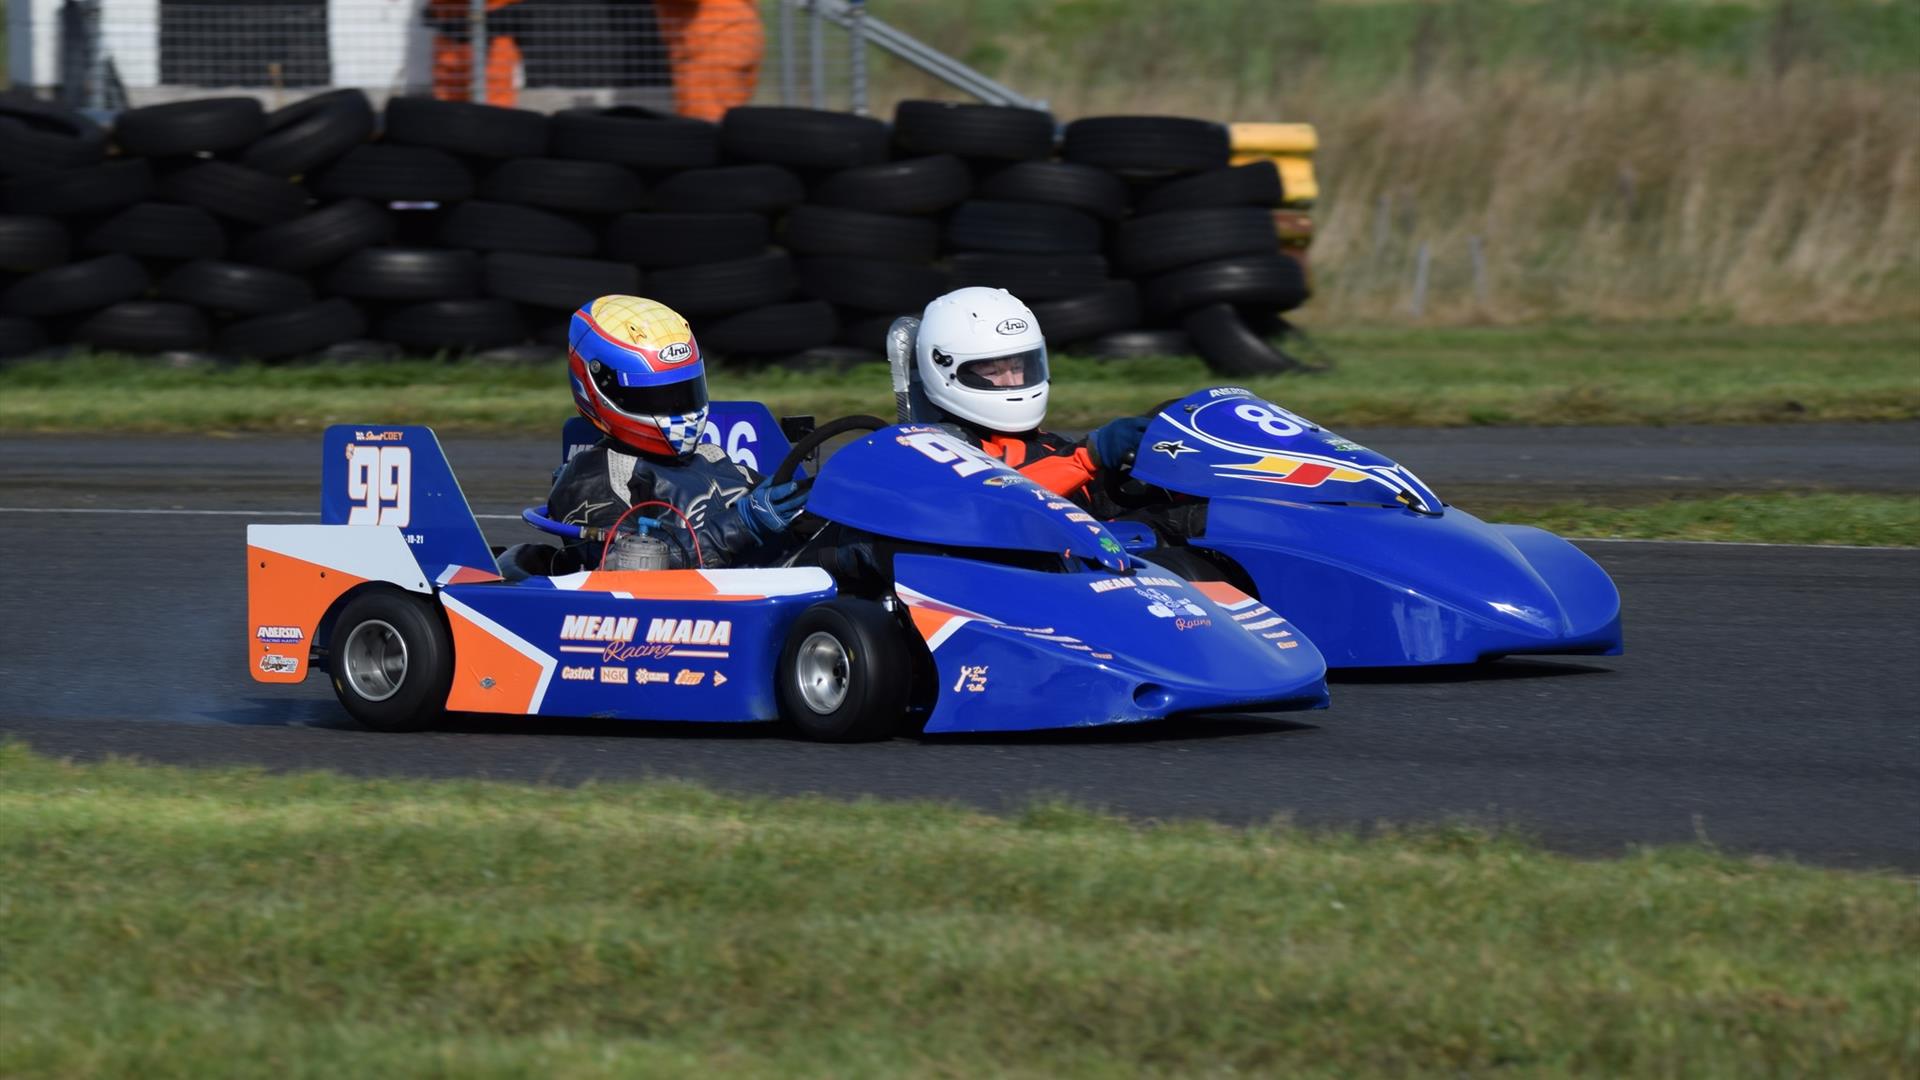 Superkarts in Action